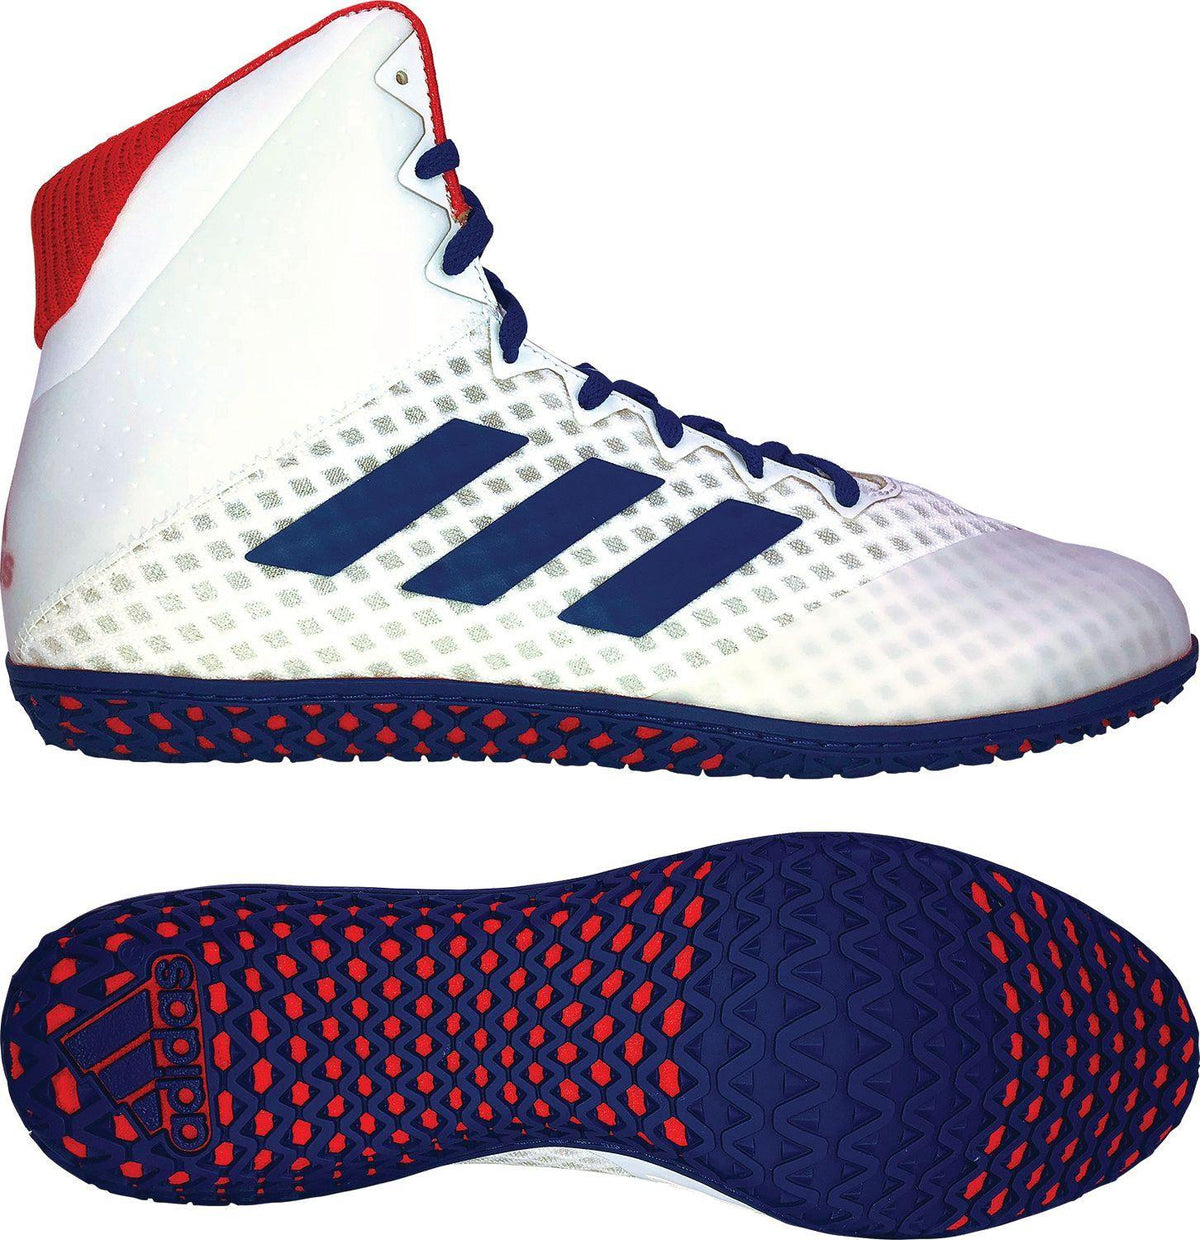 Adidas Shoe Wrestling Mat Wizard 4 White / Black CLEARANCE